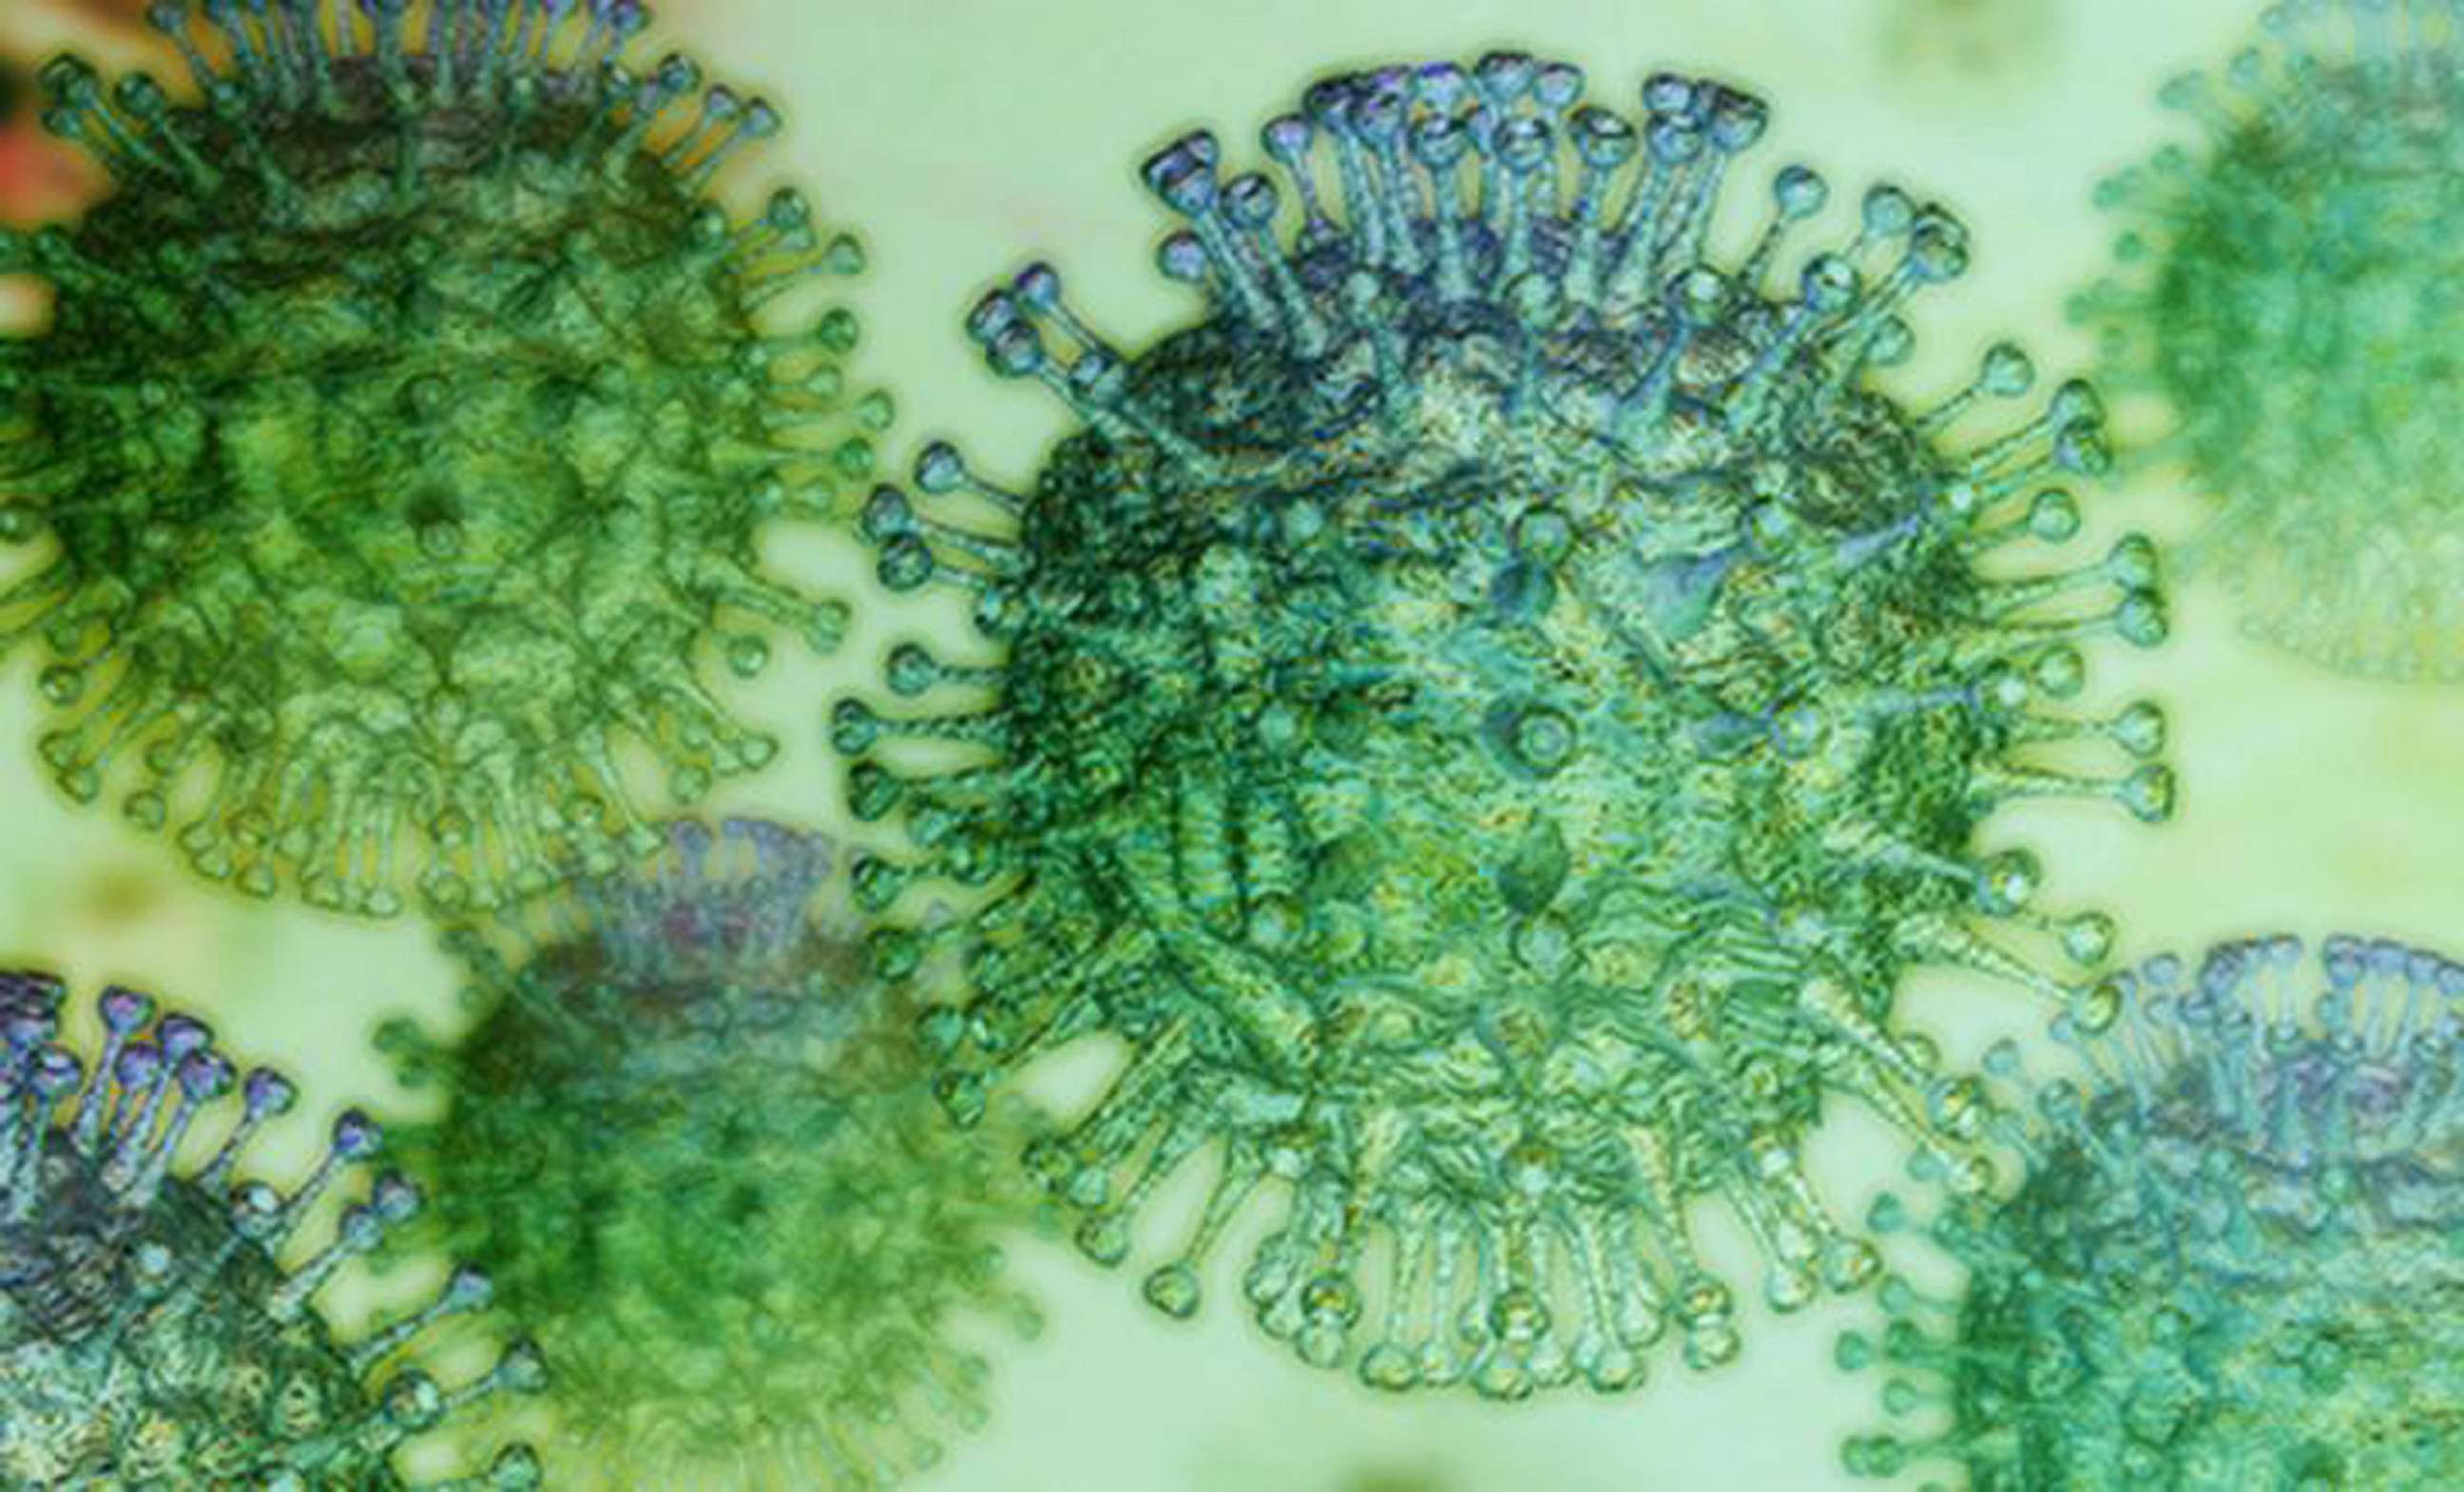 PHOTO: In this April 3, 2020, file photo, the COVID-19 coronavirus is shown.